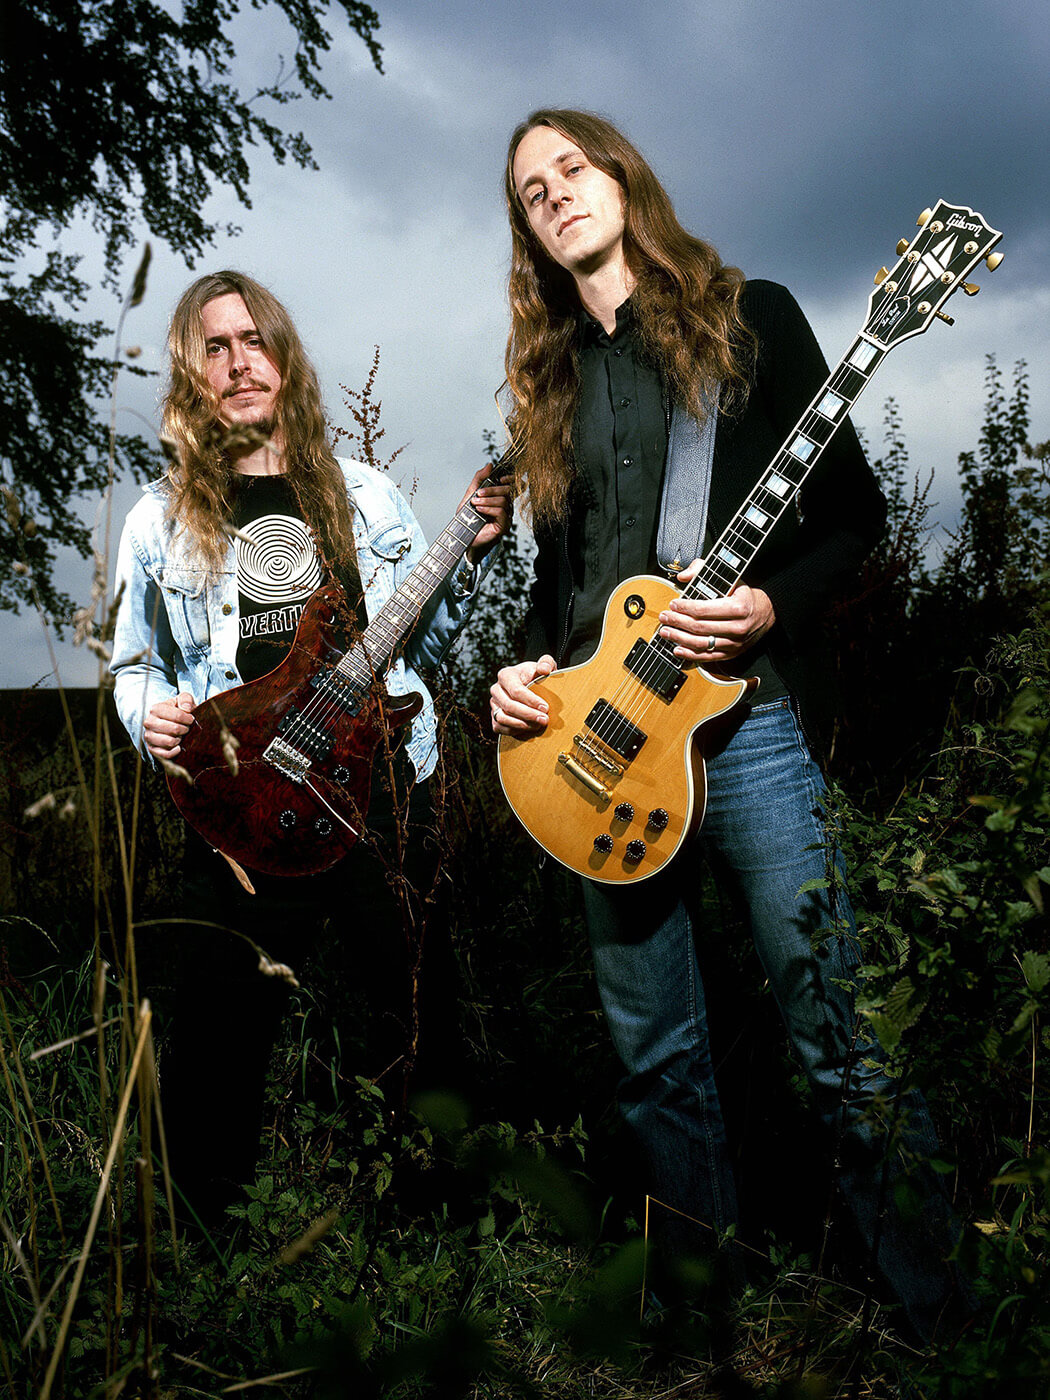 Peter Lindgren and Mikael Akerfeldt of Opeth